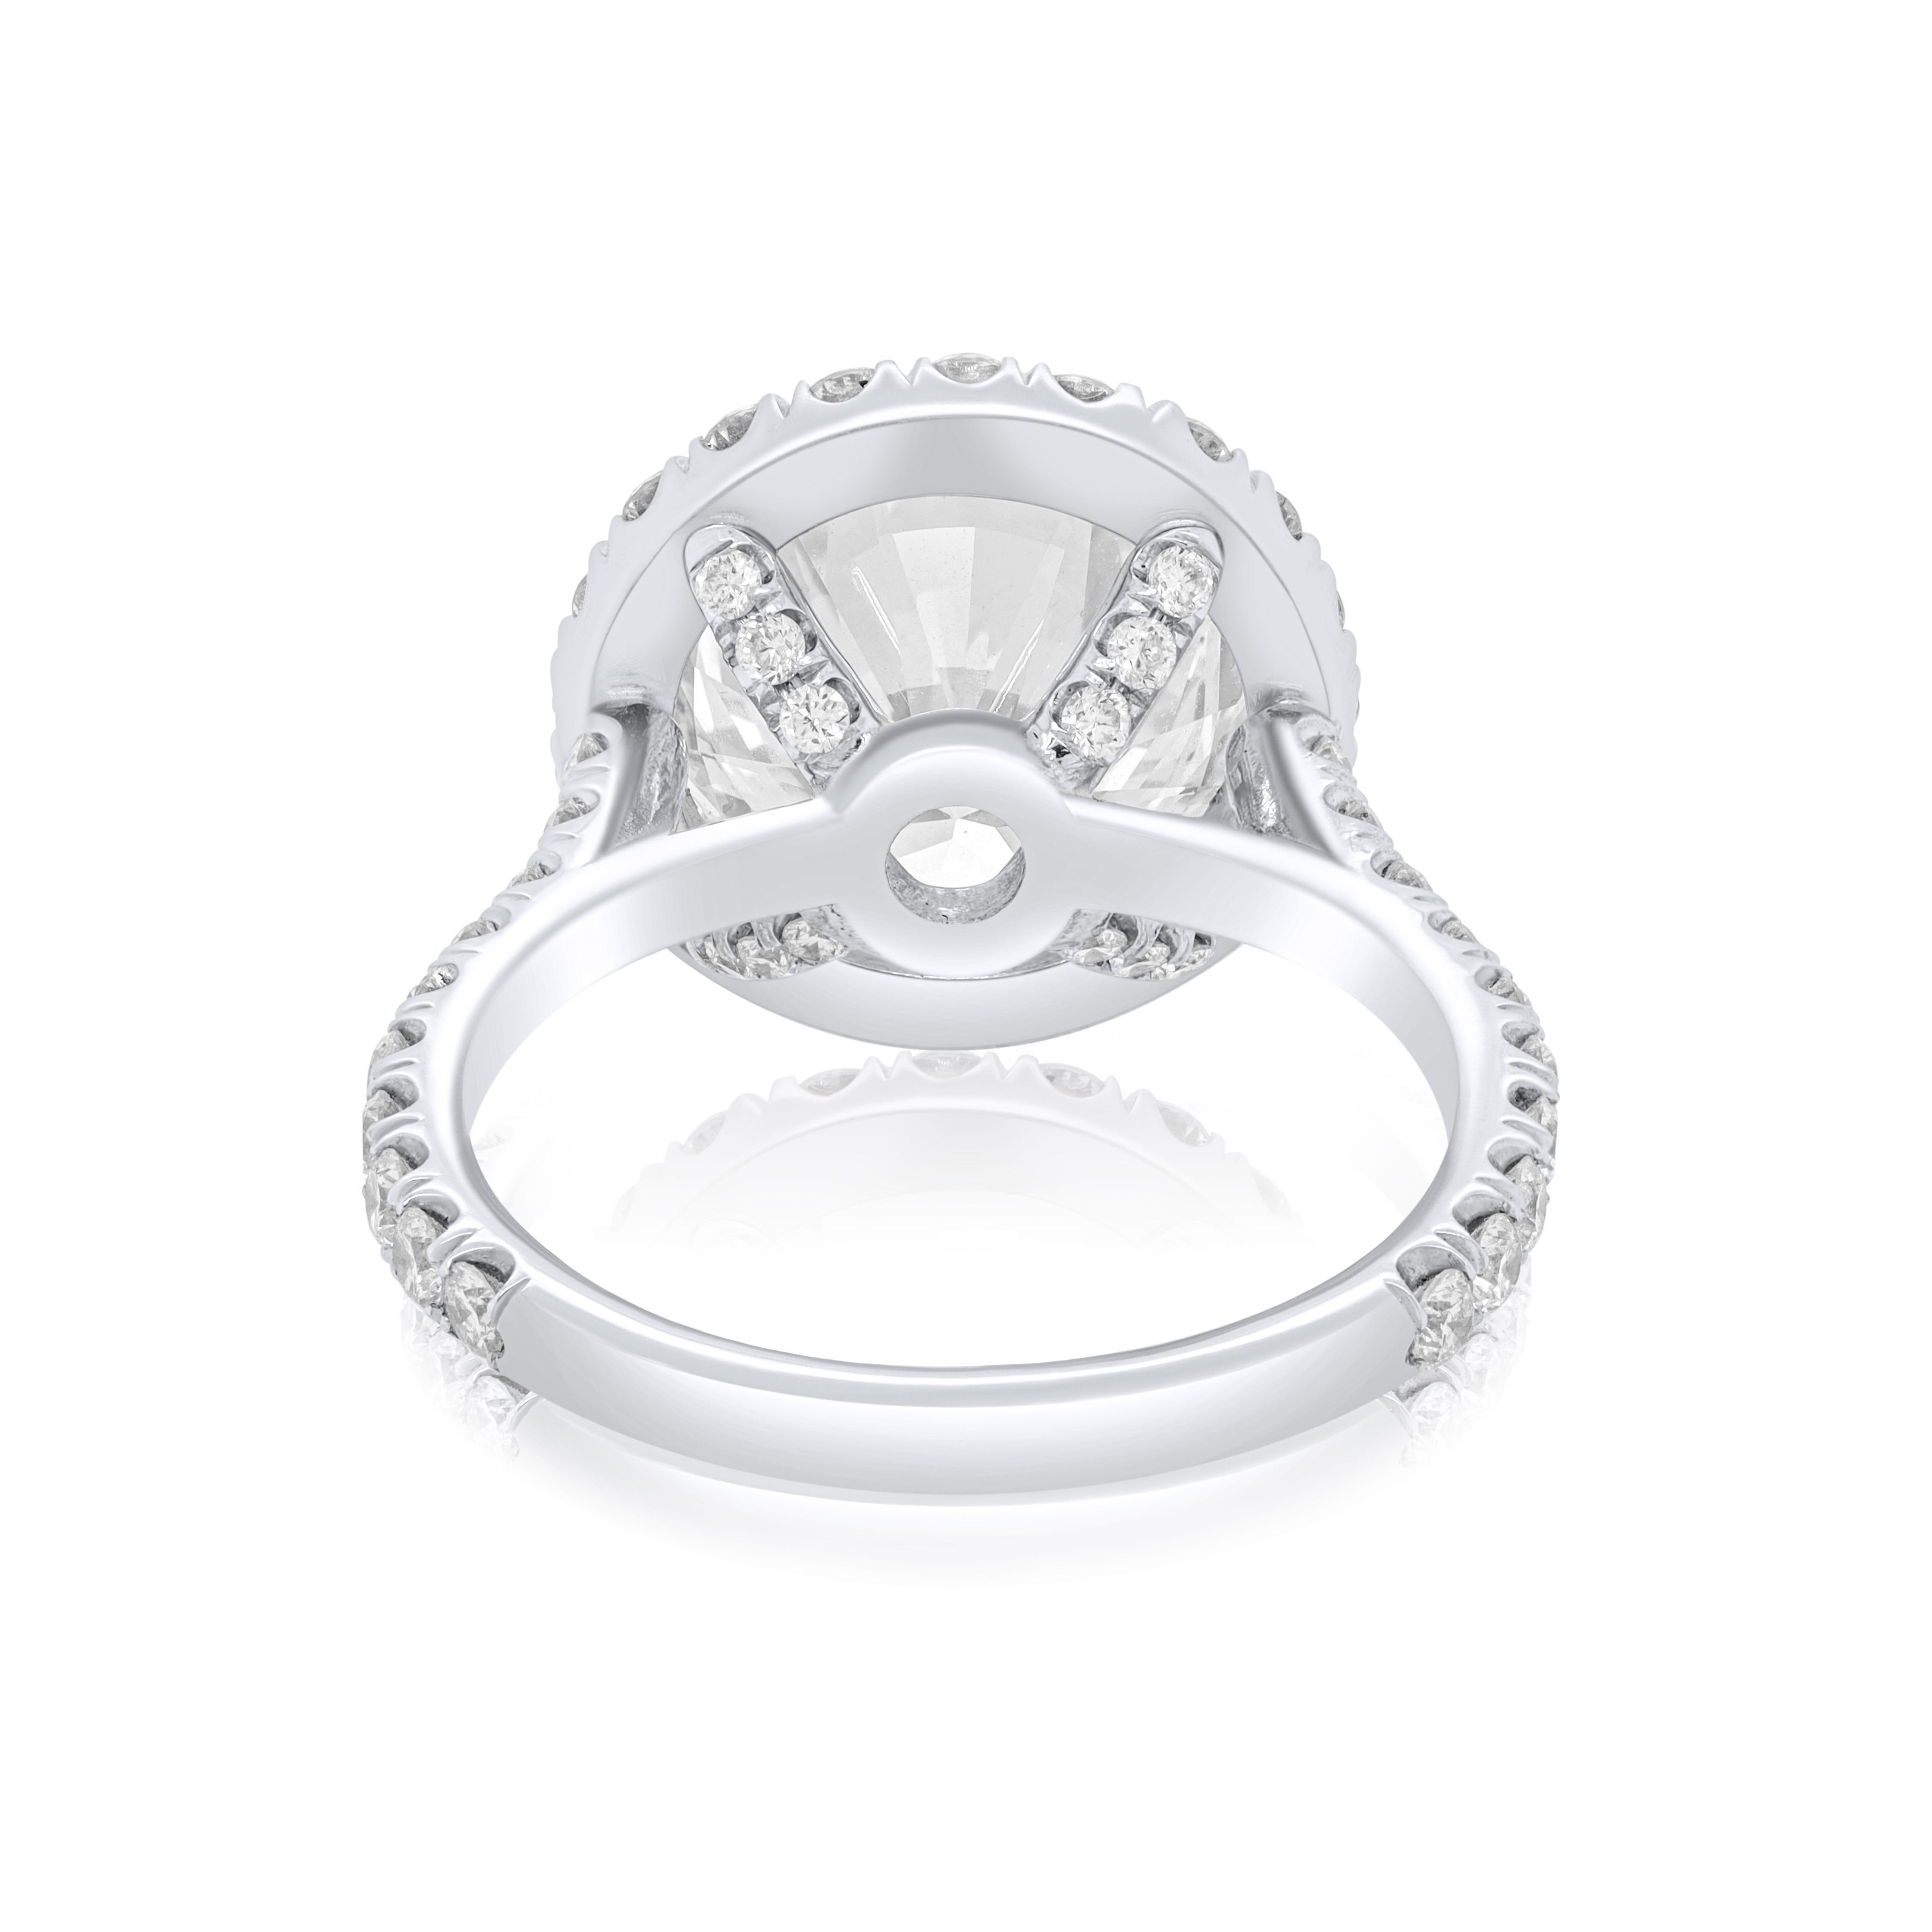 4.54 Carat Diamond Ring in Platinum Setting with Micropave Diamonds In New Condition For Sale In New York, NY